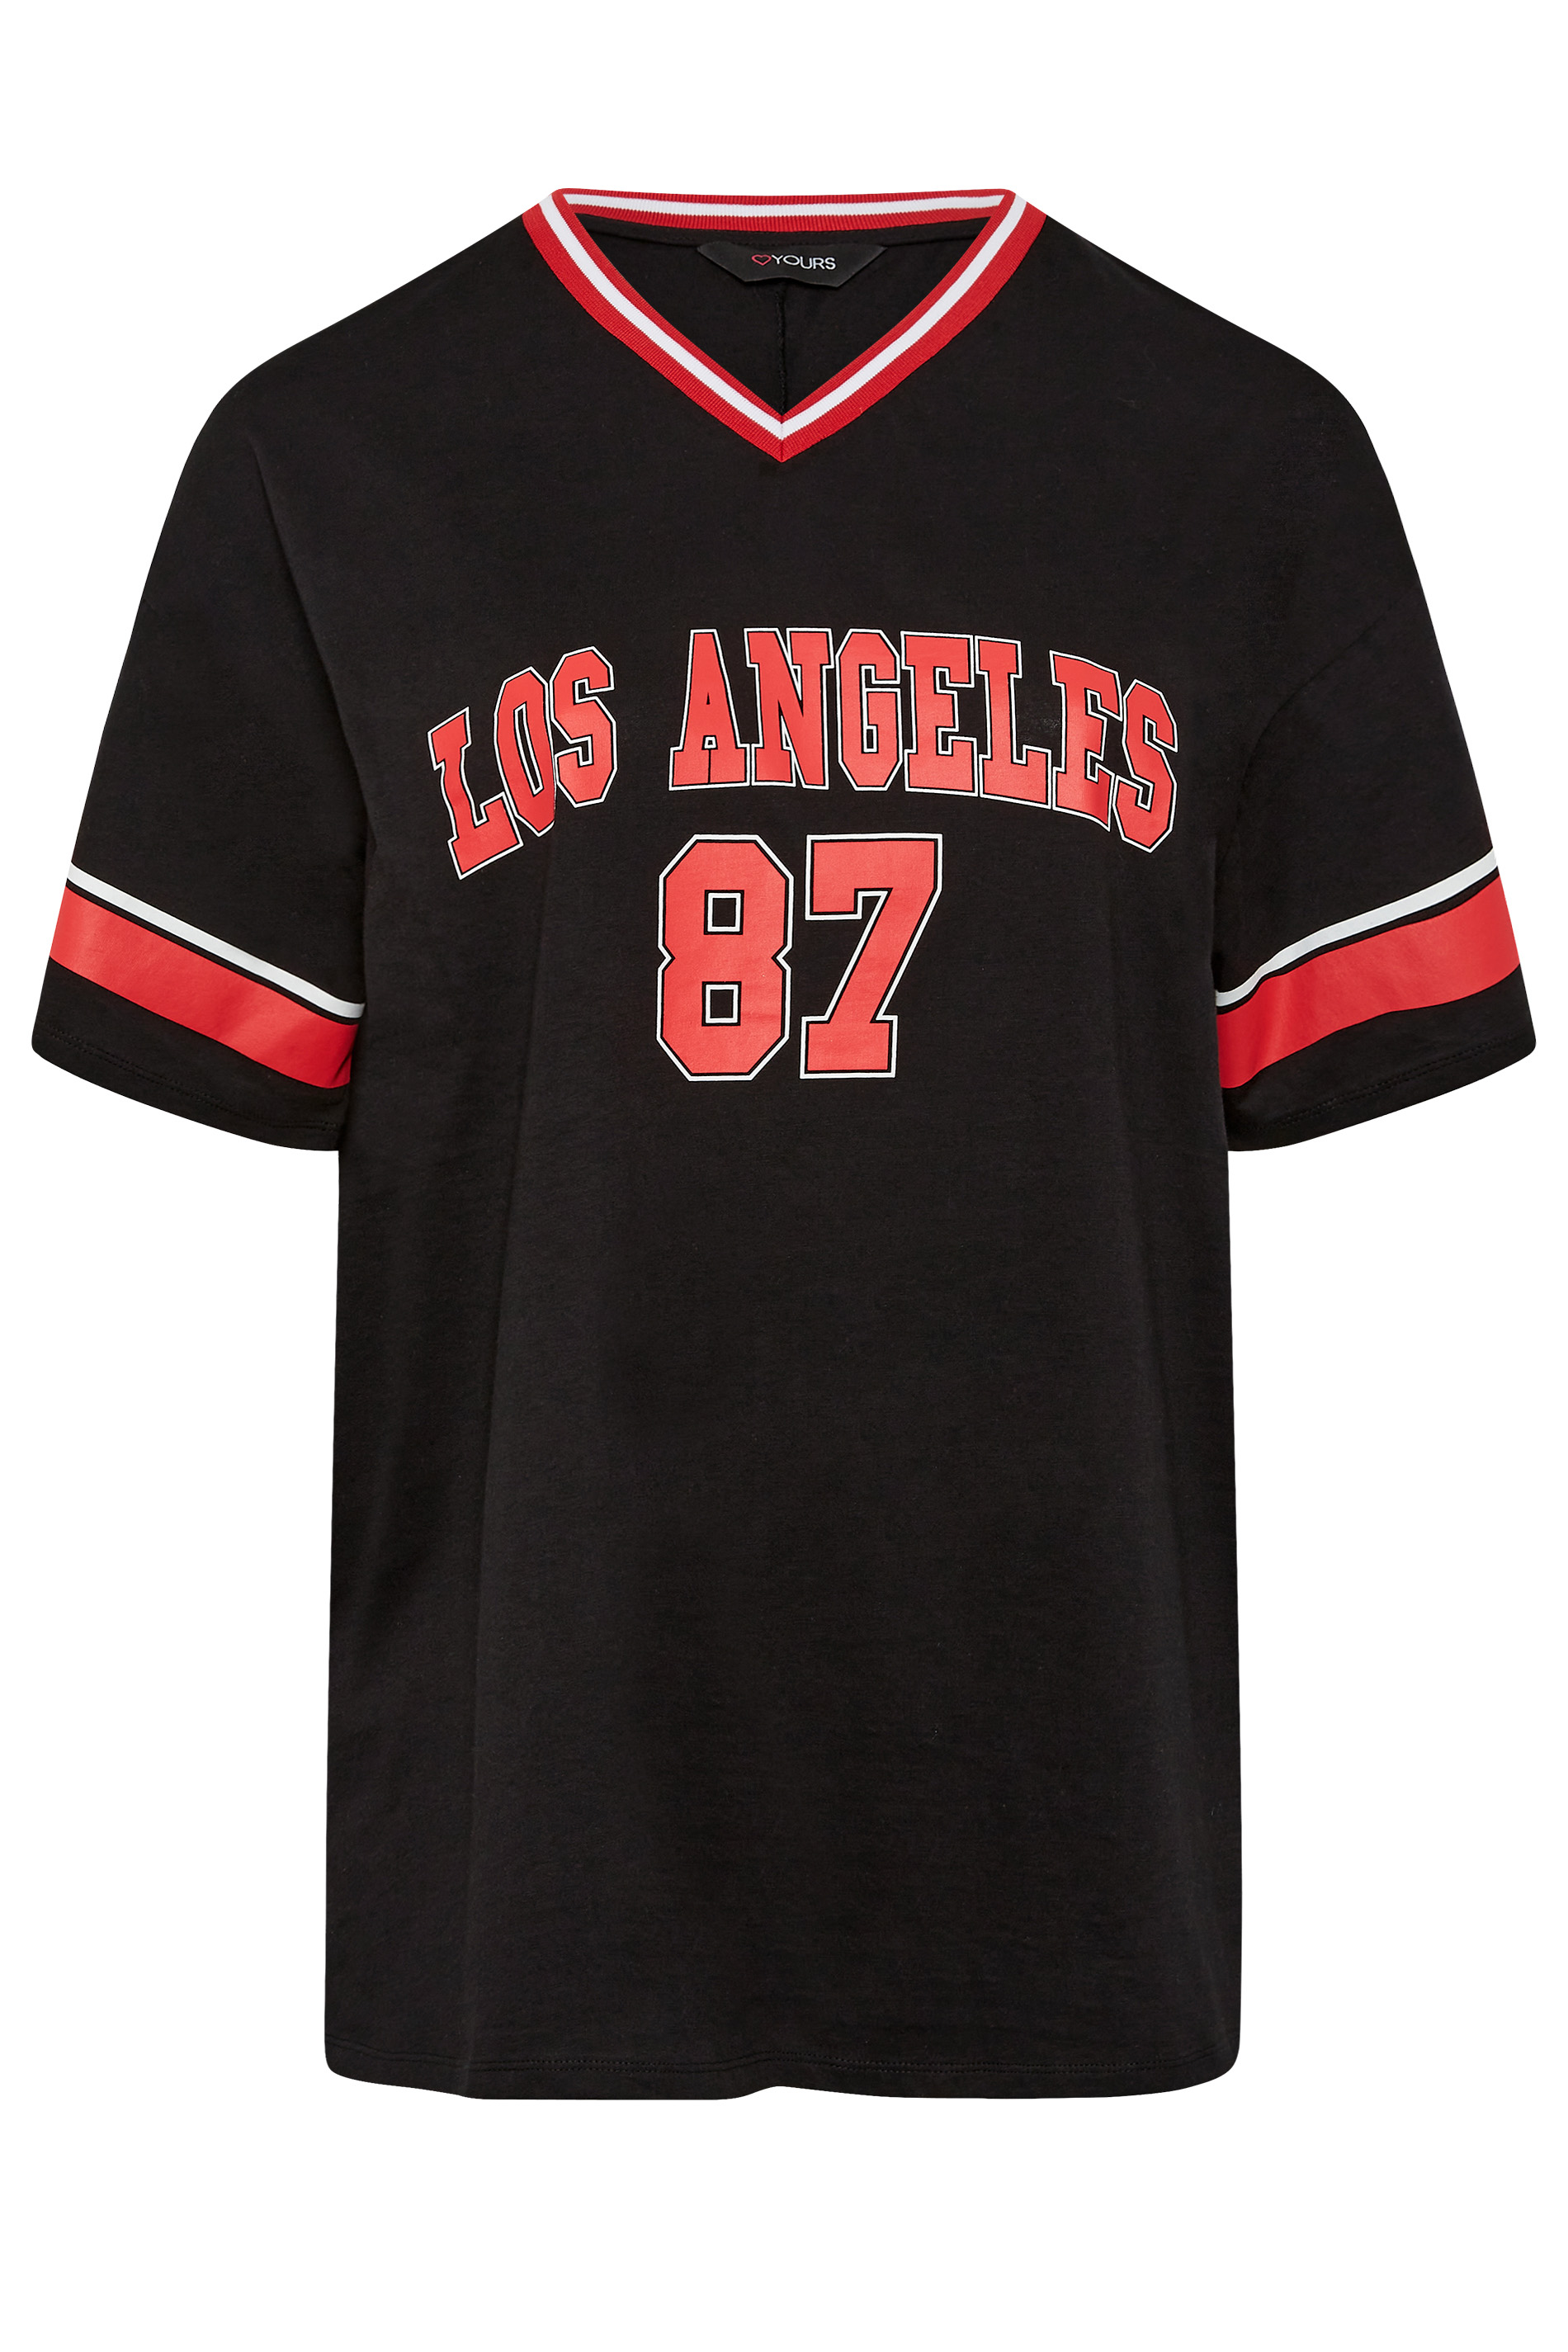 YOURS Plus Size Black & Red 'Los Angeles' Varsity T-Shirt